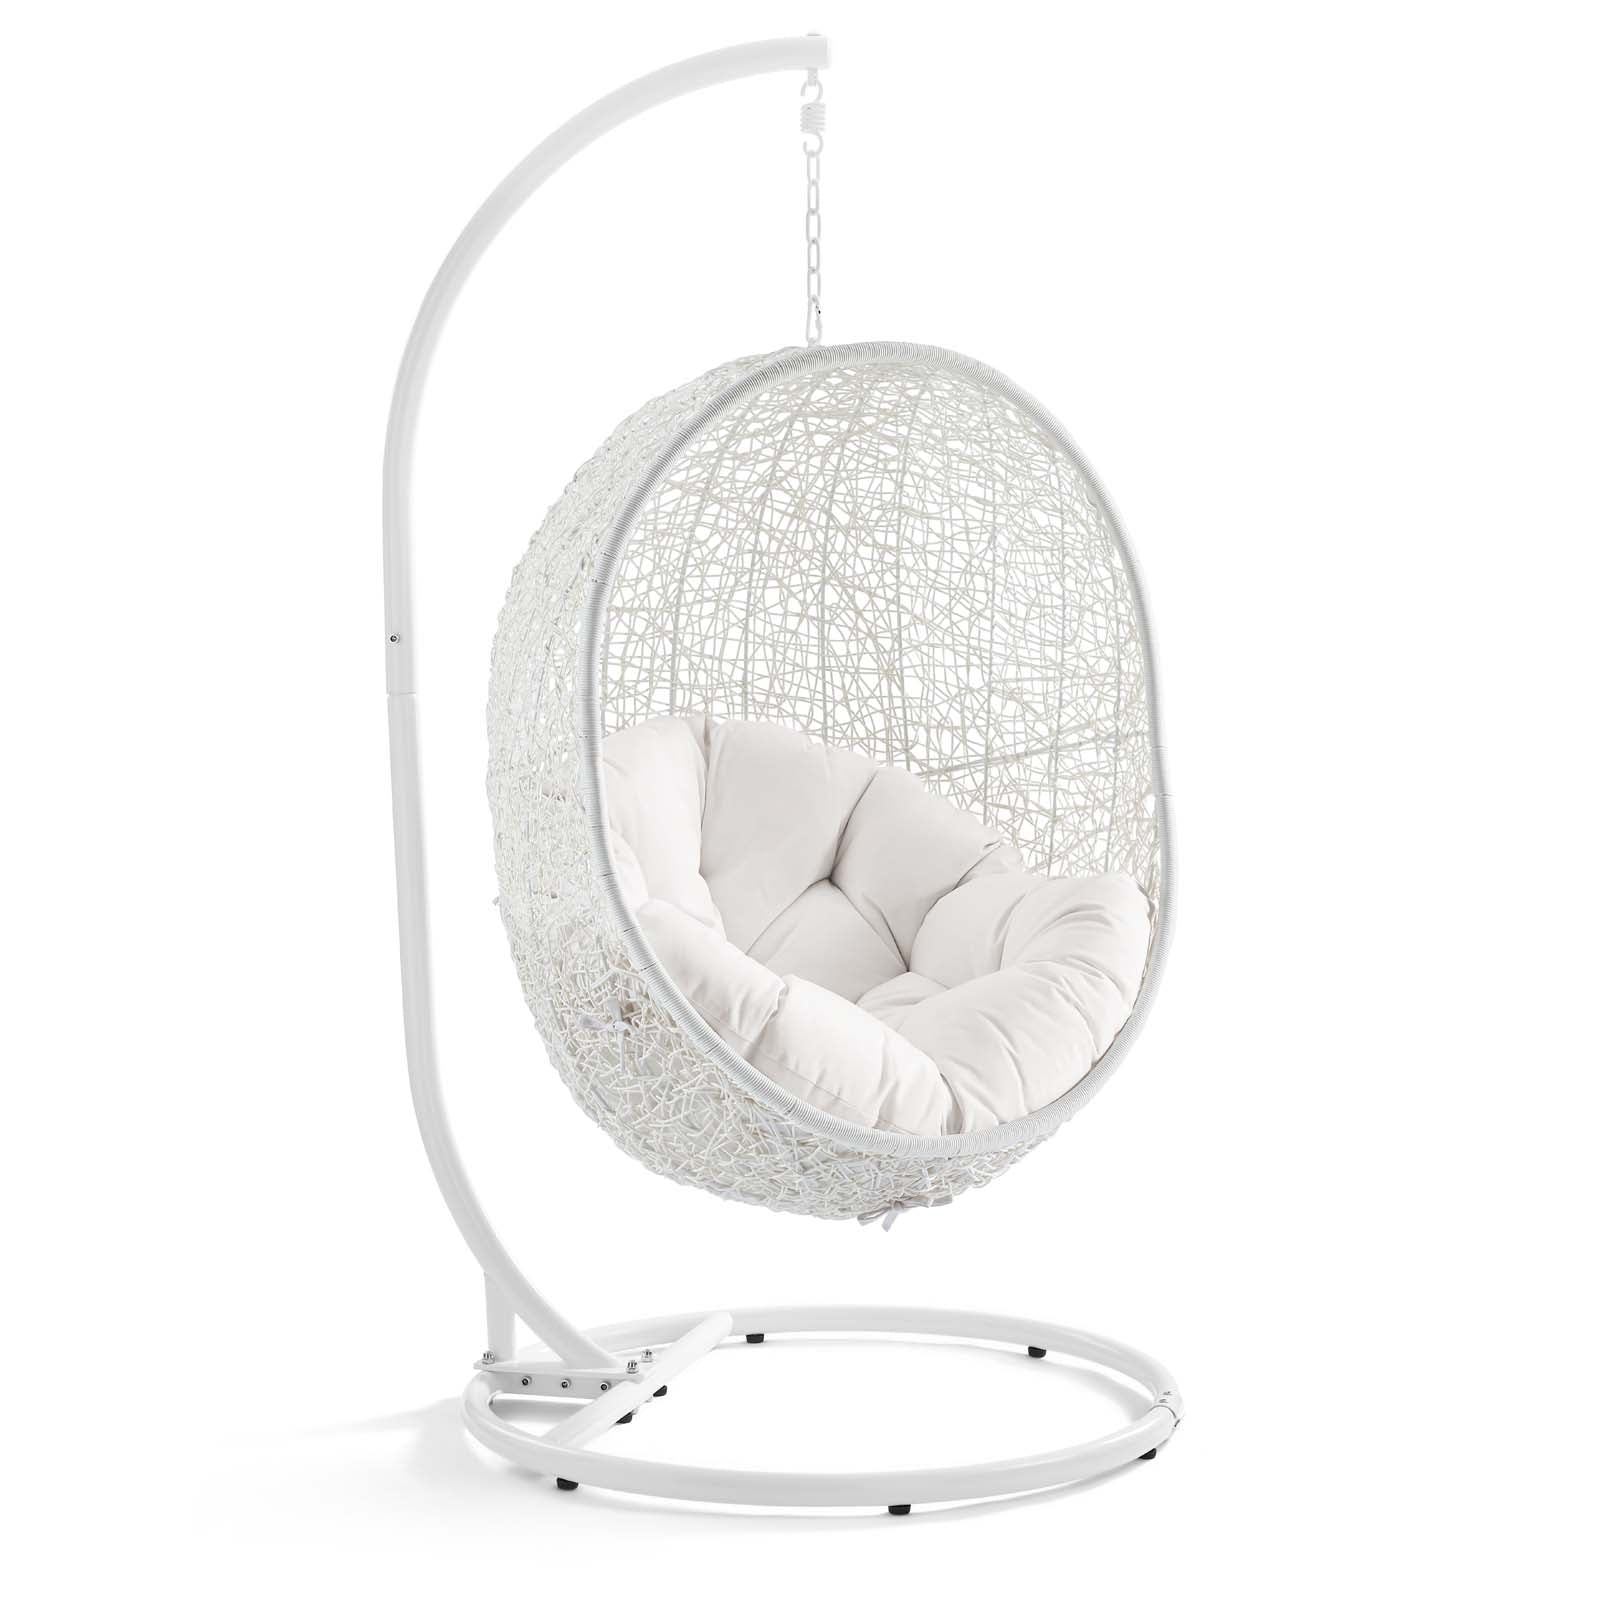 Modway Outdoor Swings - Hide Outdoor Patio Sunbrella Swing Chair With Stand White White